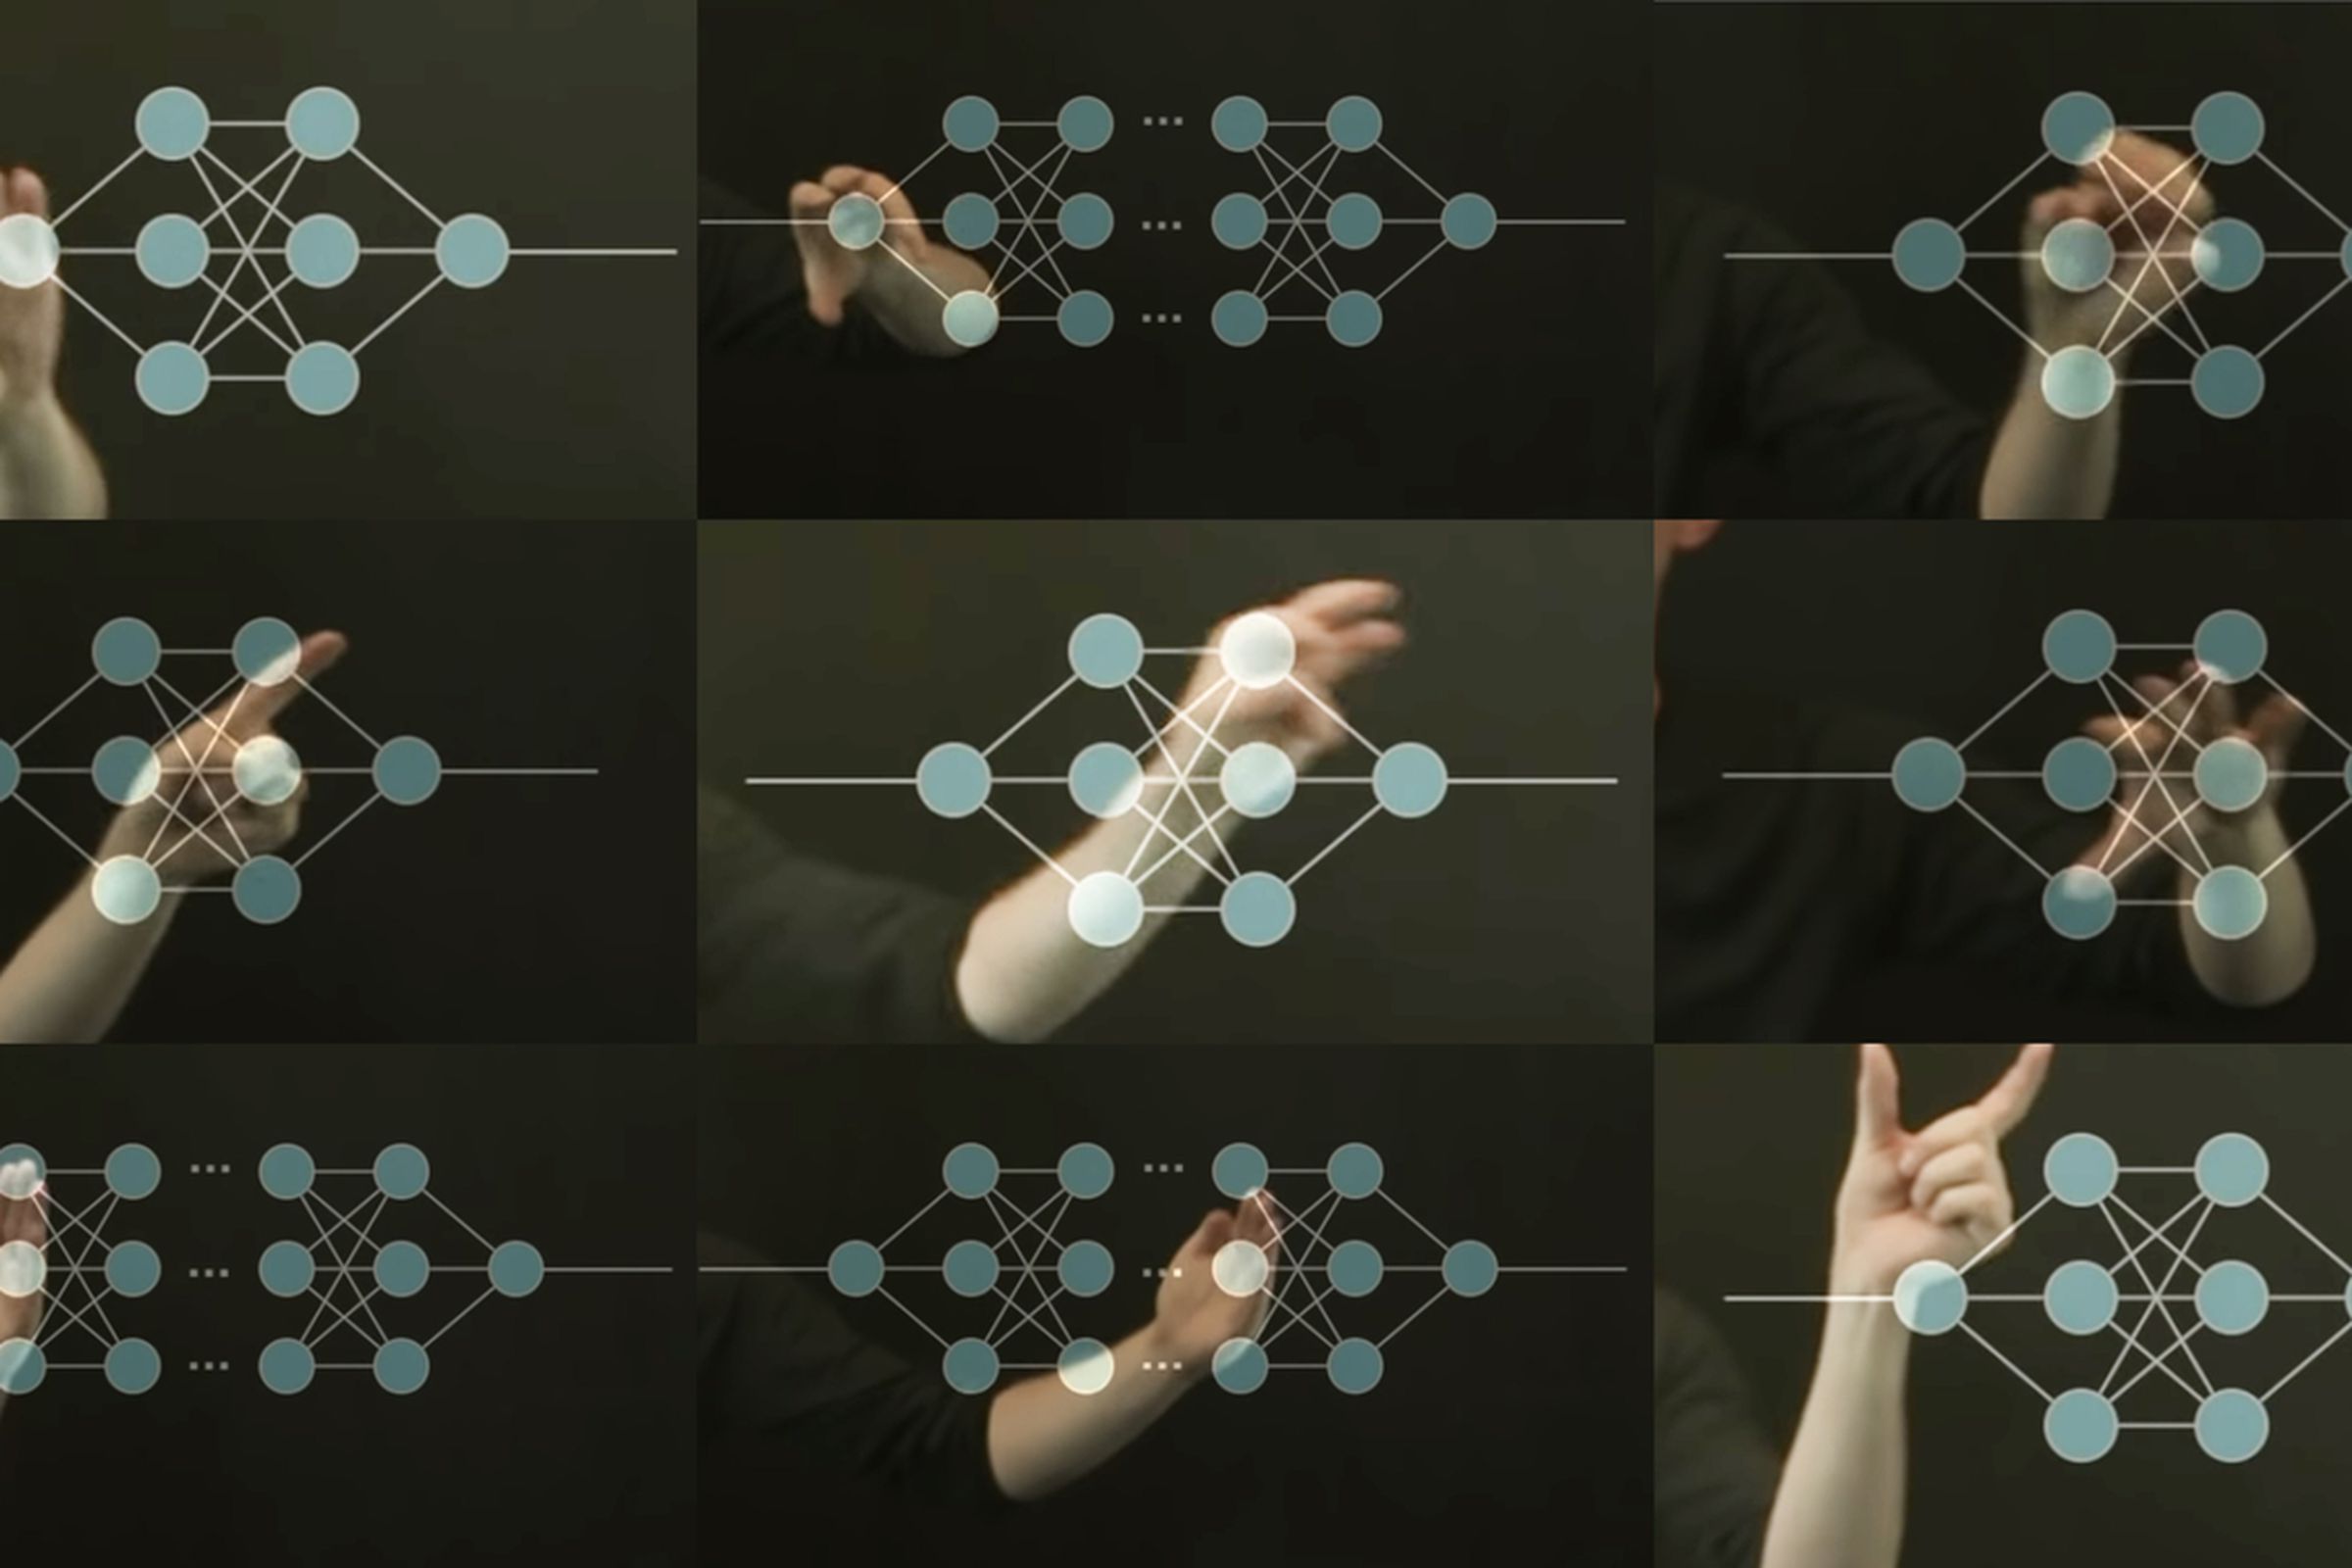 The image shows nine thumbnails of a hand in different poses overlaid by diagrams of a neural network. 